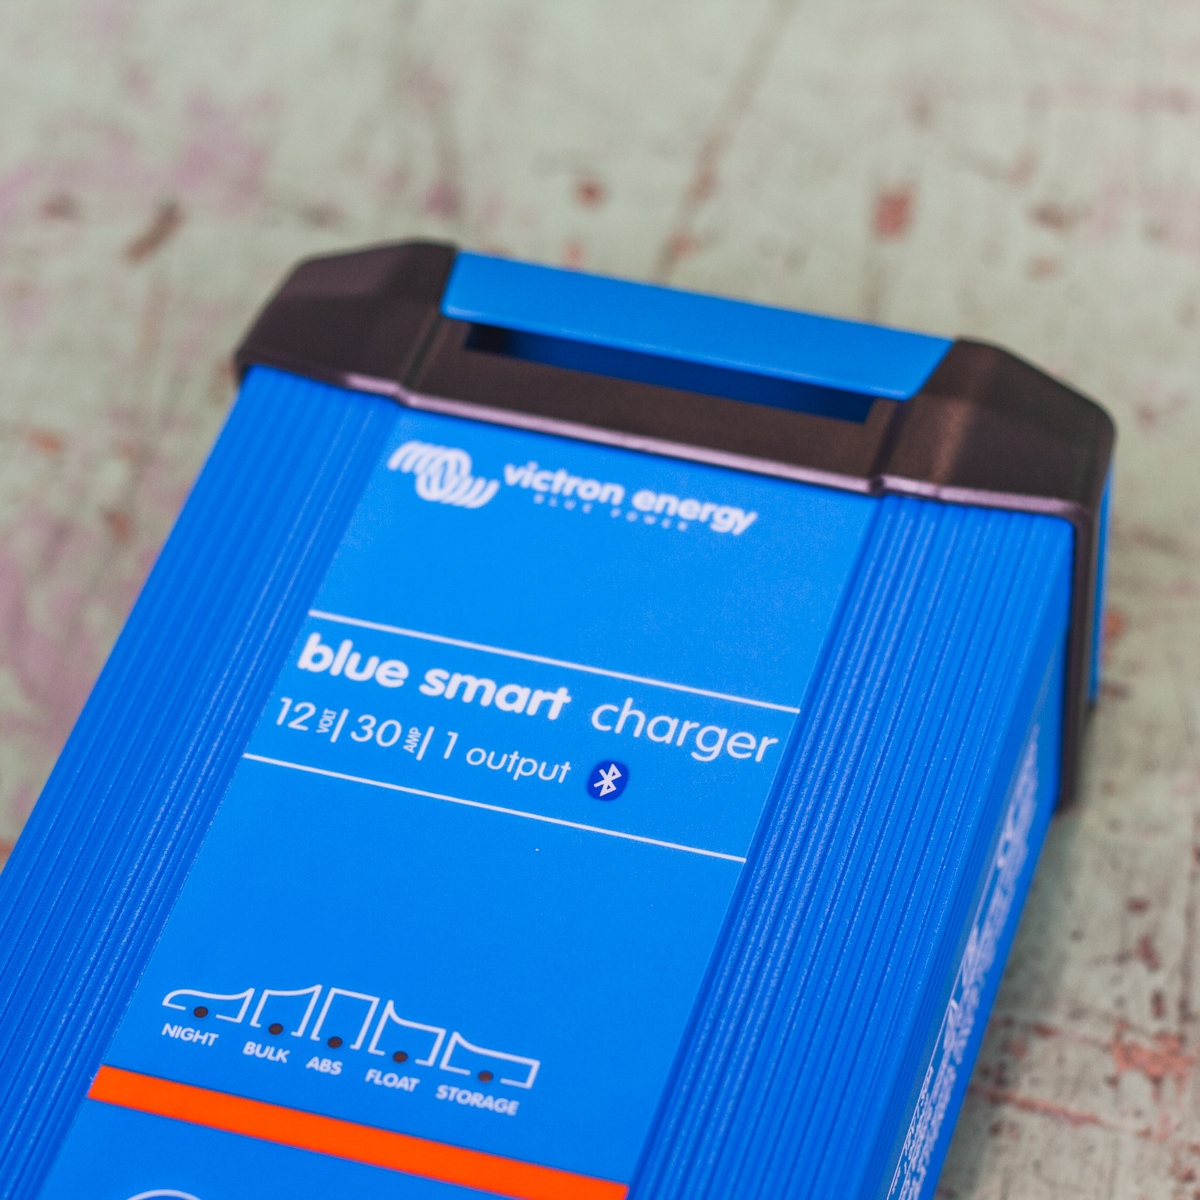 A Victron Battery Charger 12/30 - Indoor (IP22) Blue Smart - 1 Output with Bluetooth capability, in a blue color, rests on a light-colored surface.